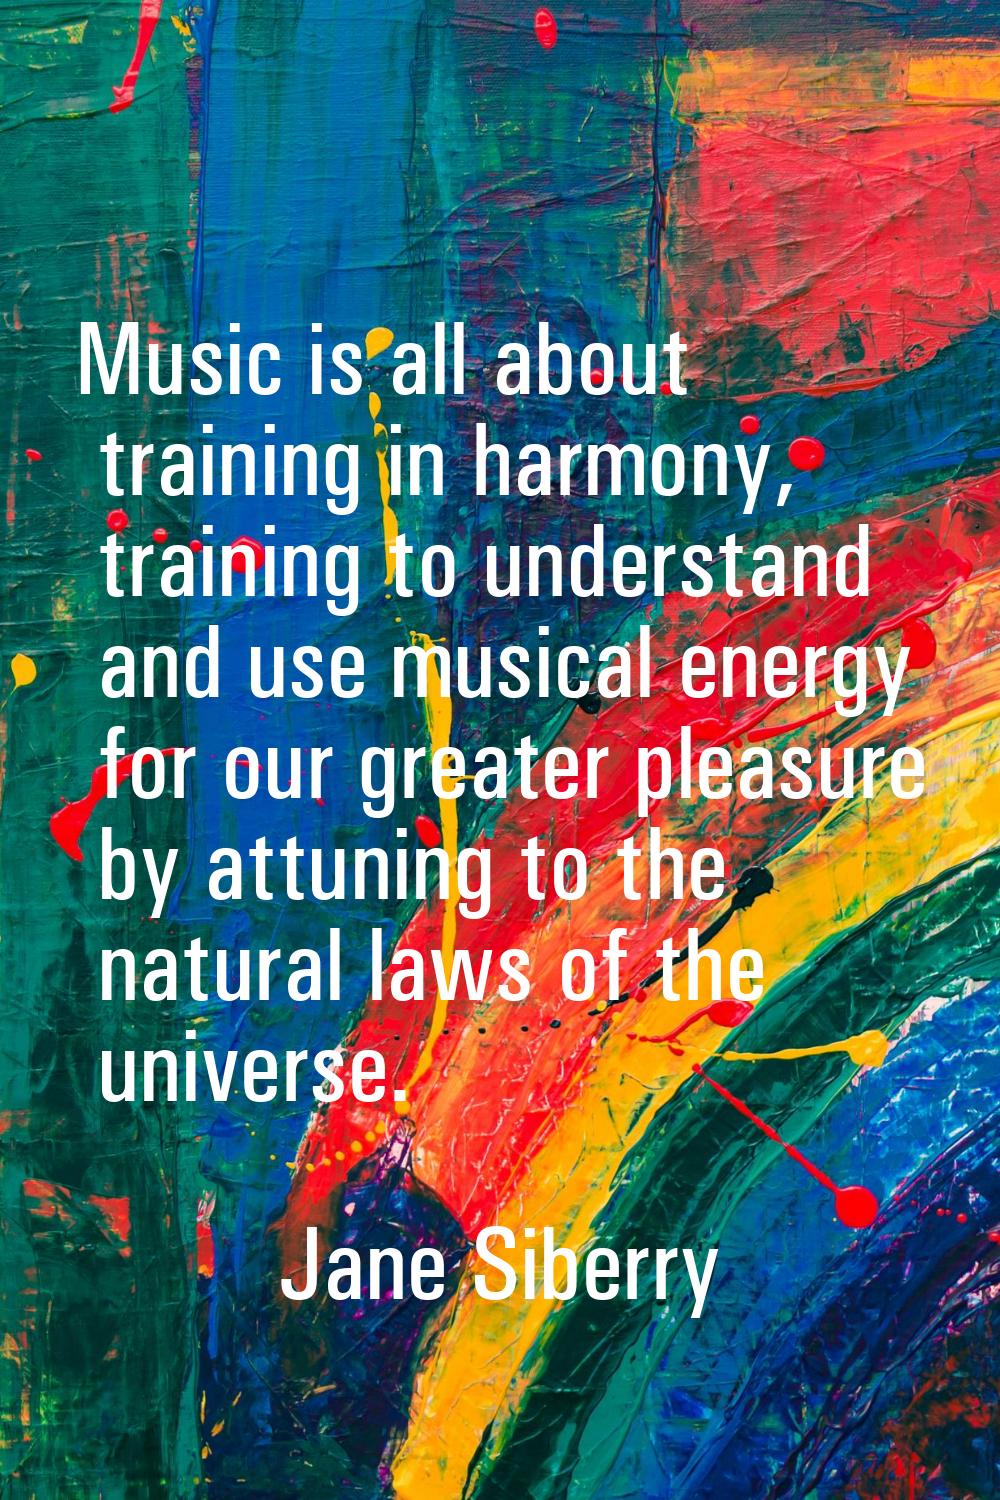 Music is all about training in harmony, training to understand and use musical energy for our great